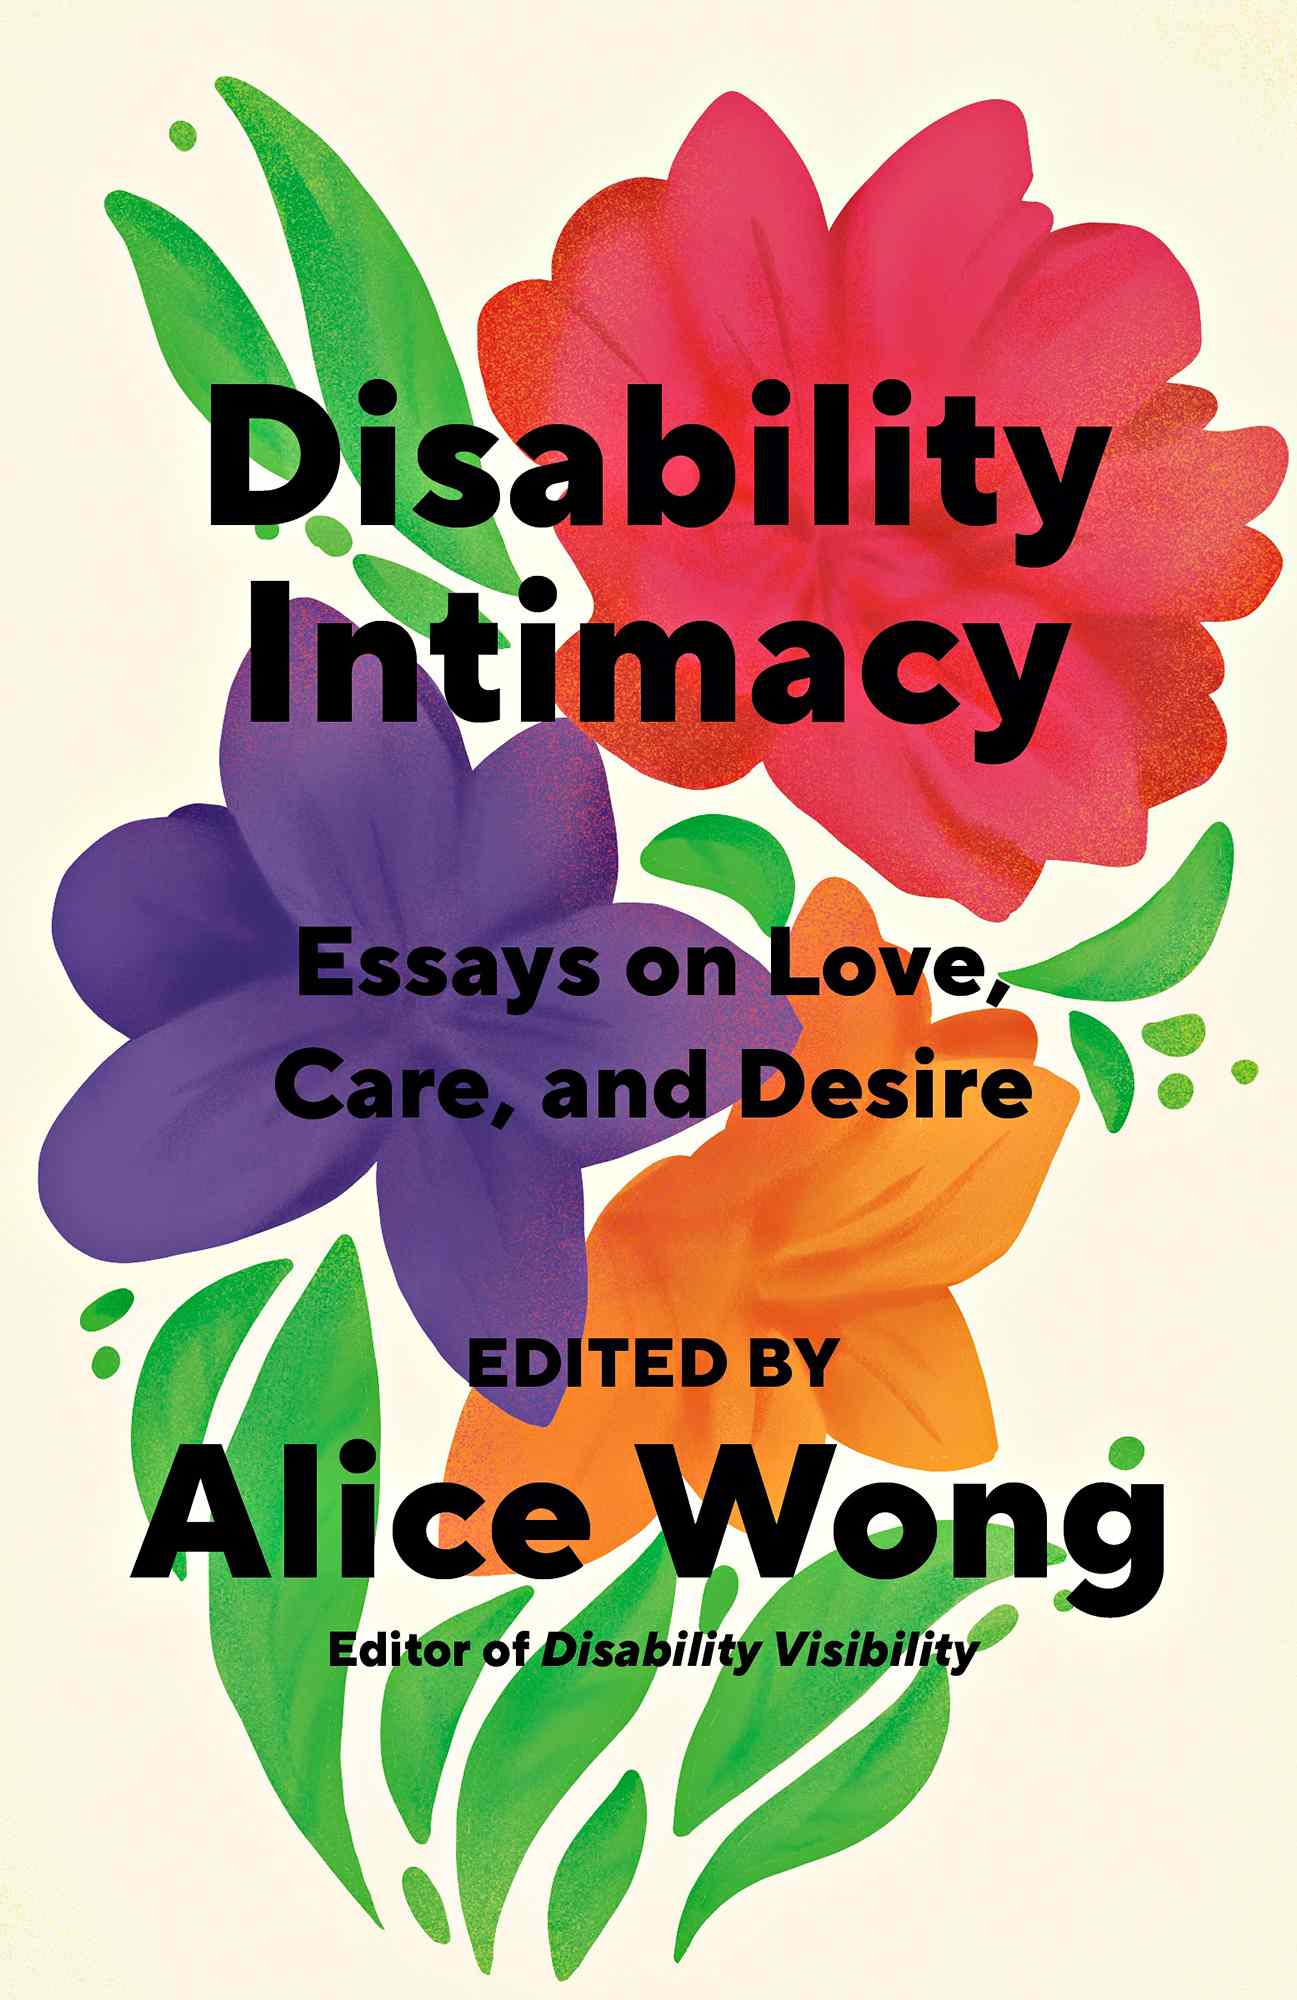 Disability Intimacy edited by Alice Wong